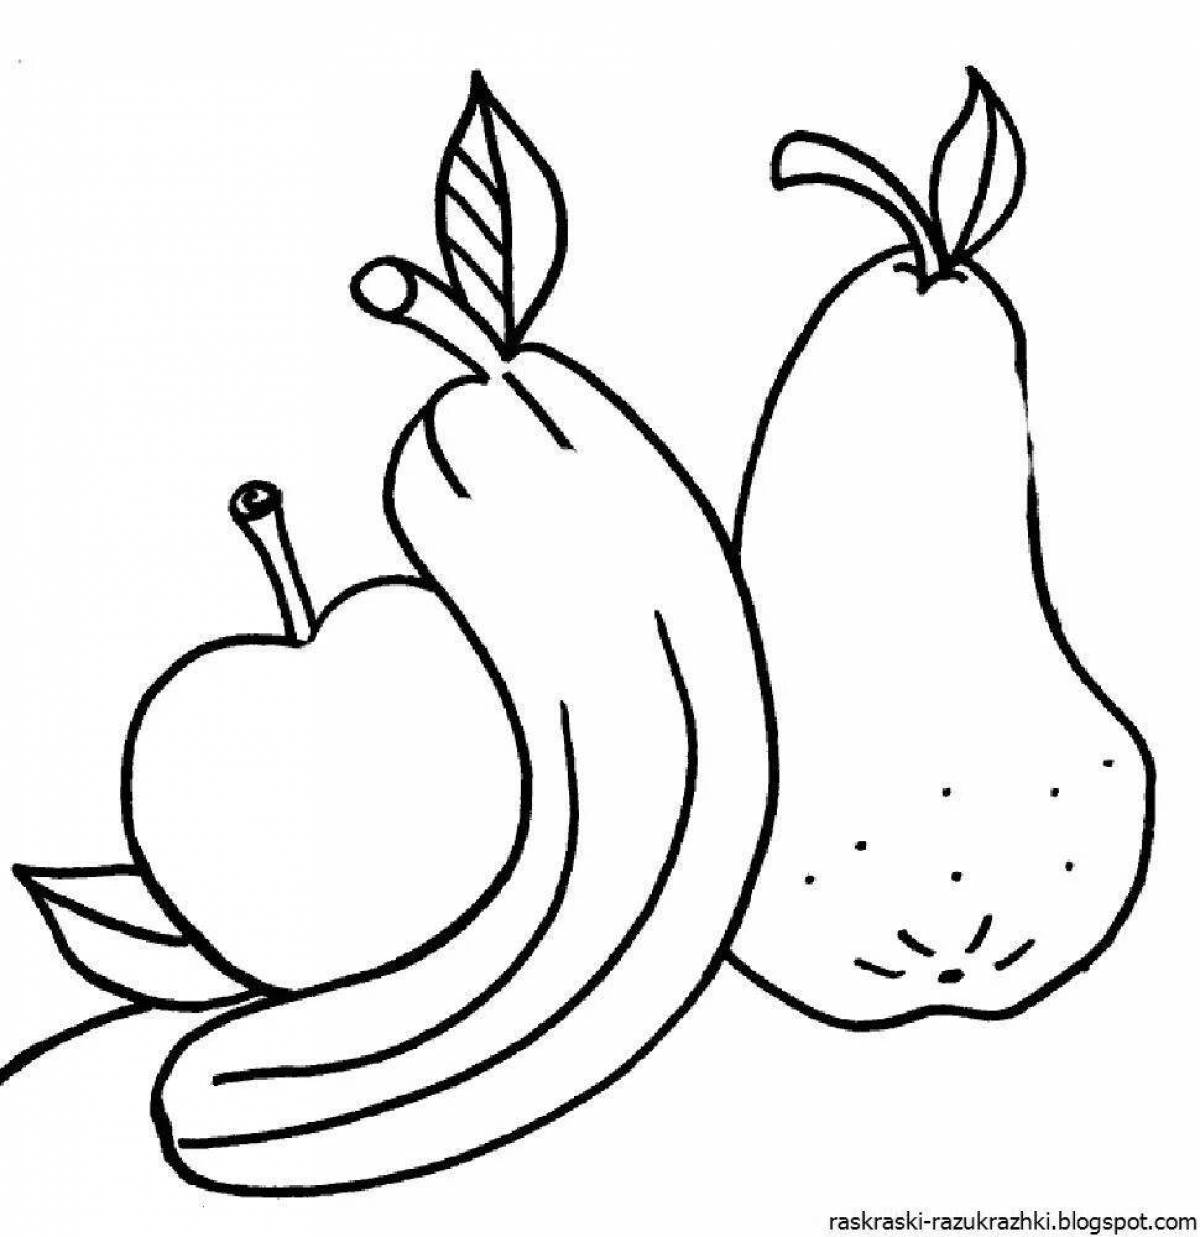 Coloring for toddlers 2-3 years old vegetables